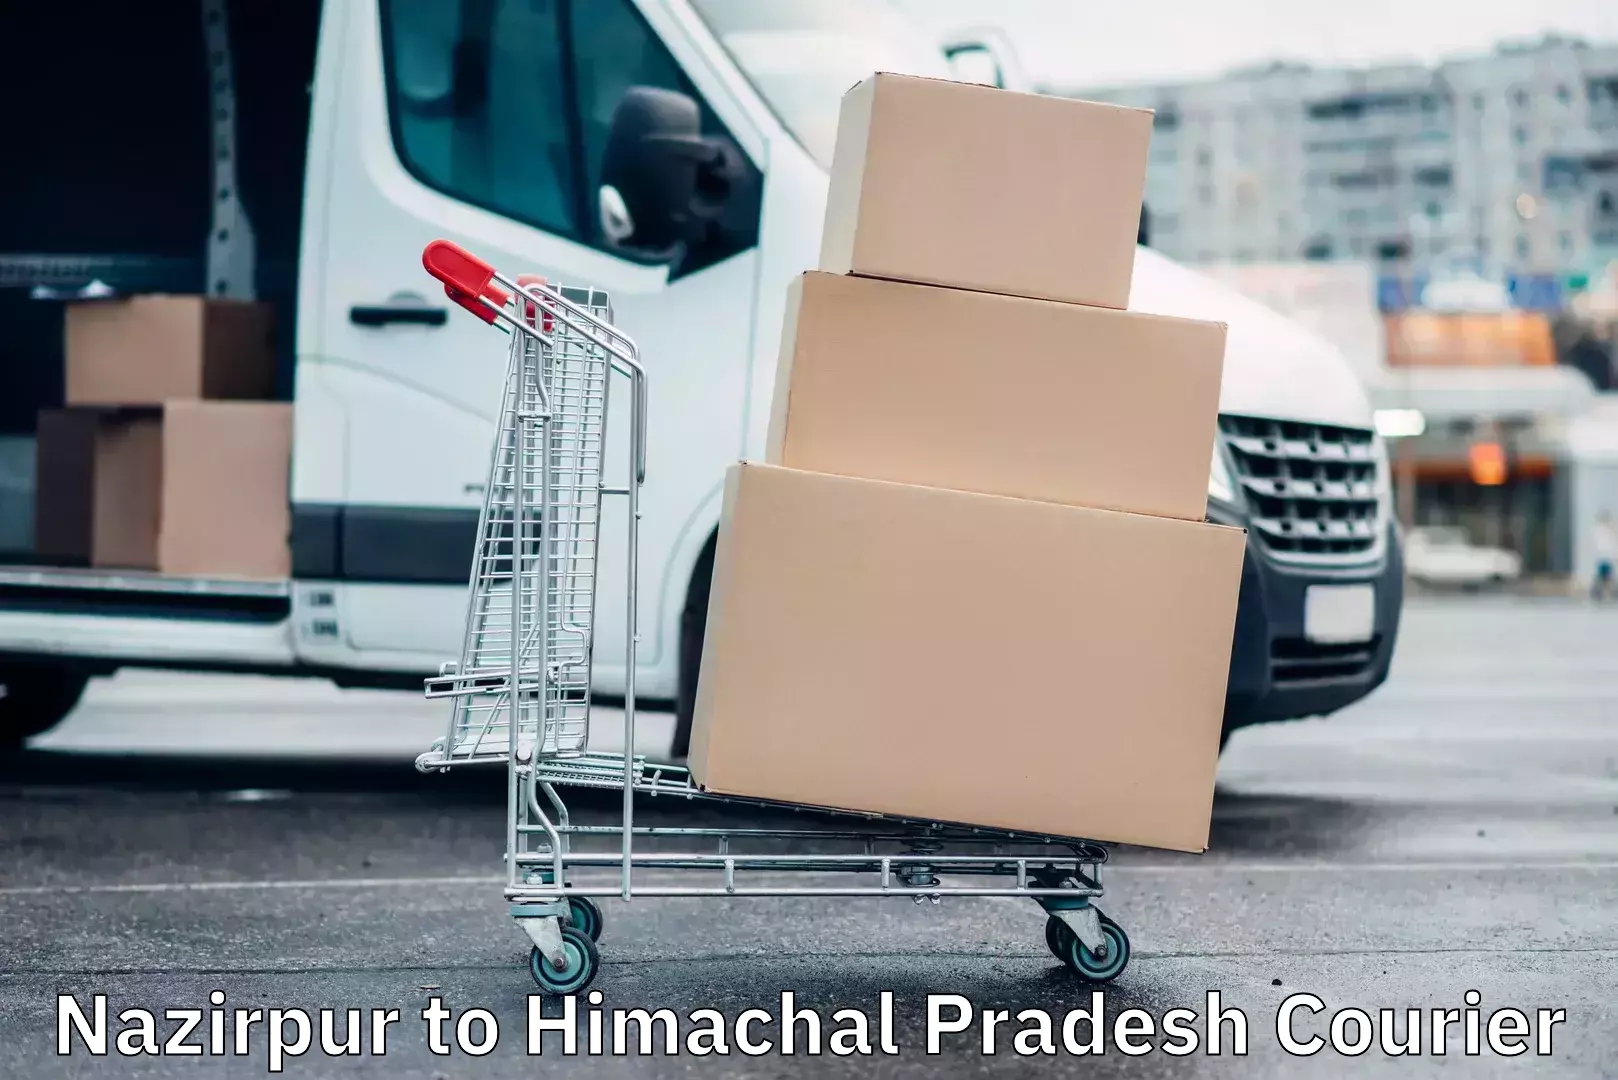 Package delivery network Nazirpur to Himachal Pradesh